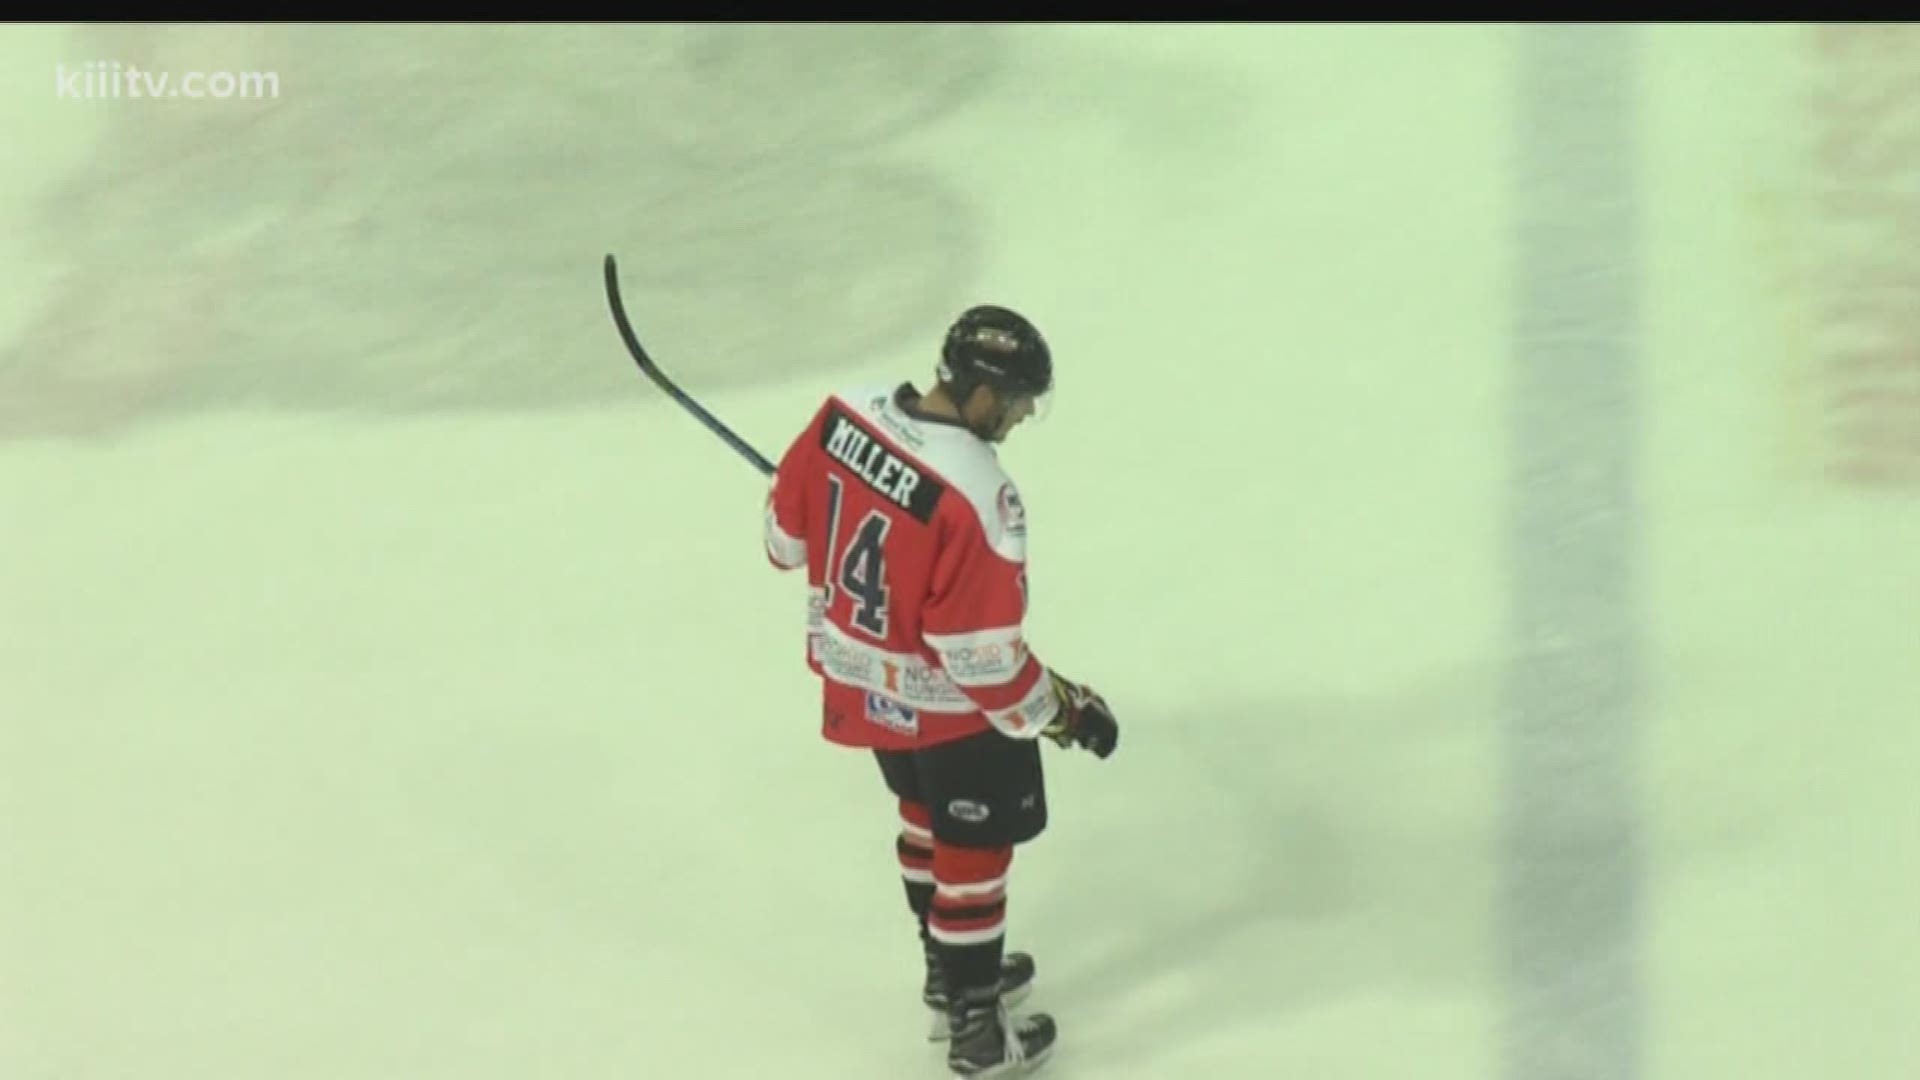 The IceRays lost their final home game of the season to the Lone Star Brahmas in overtime.